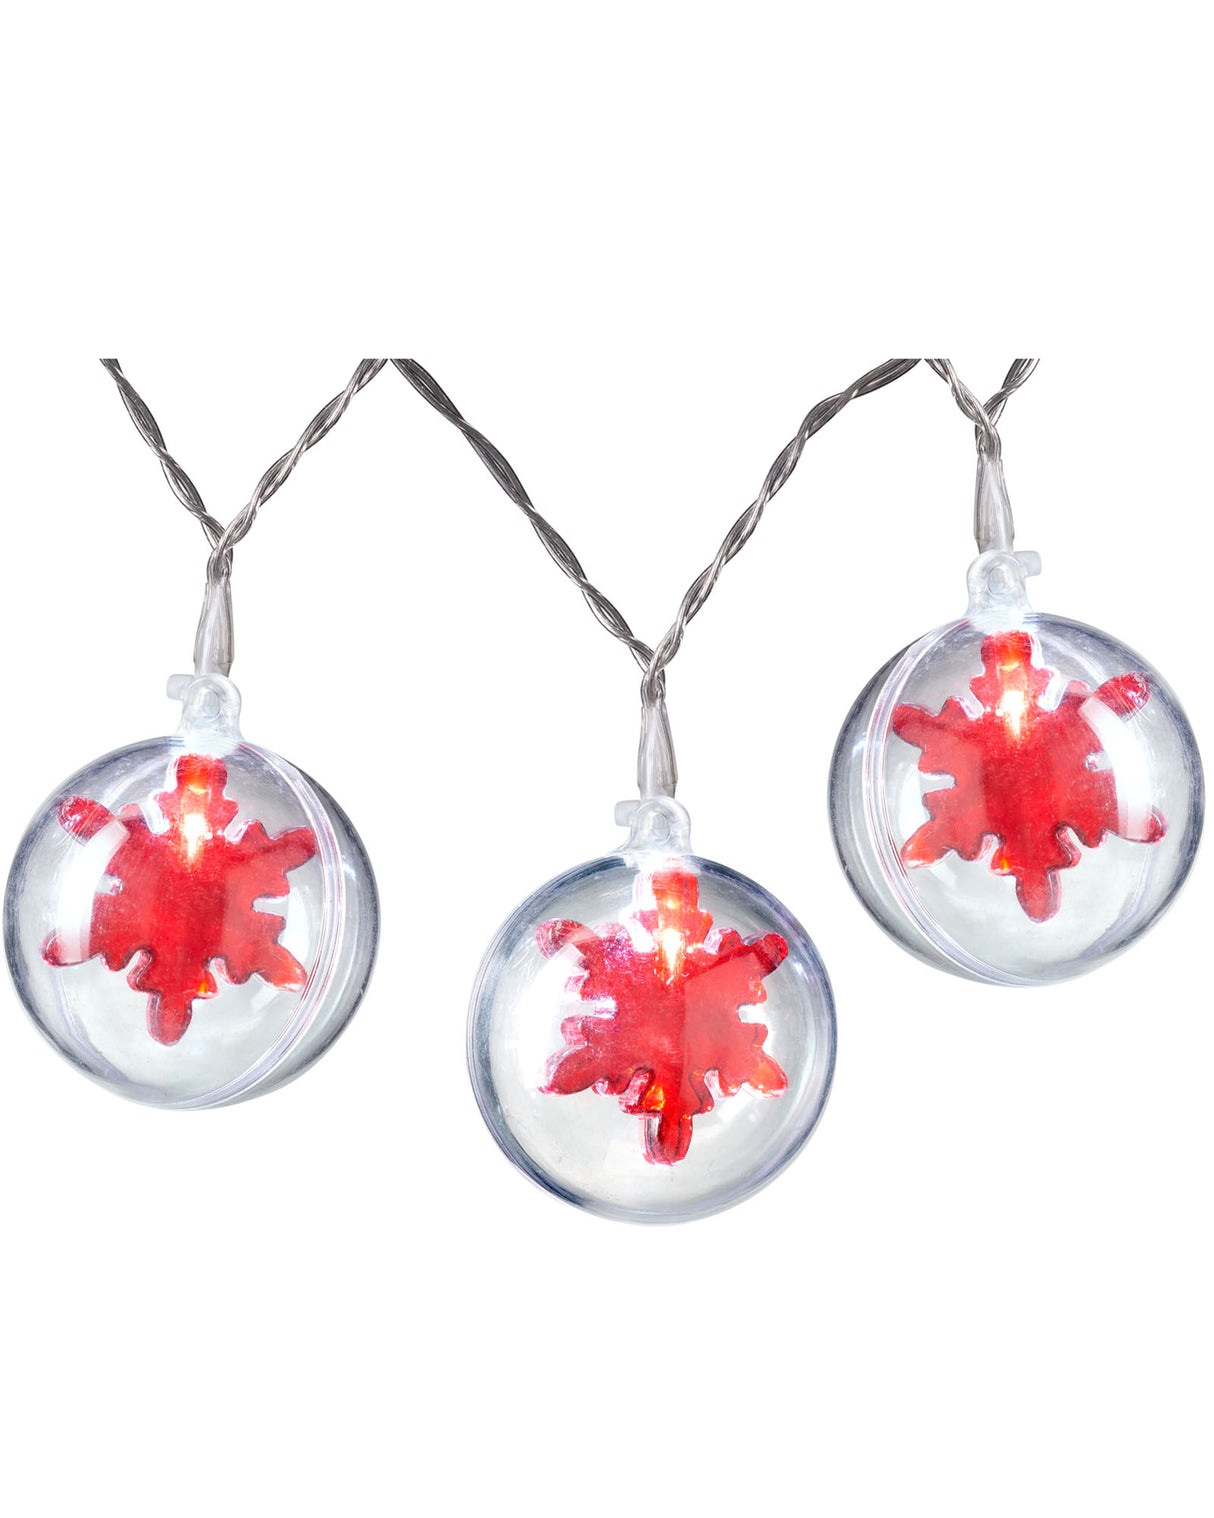 Snowflake Bauble LED Light String, Red, 1.8 m